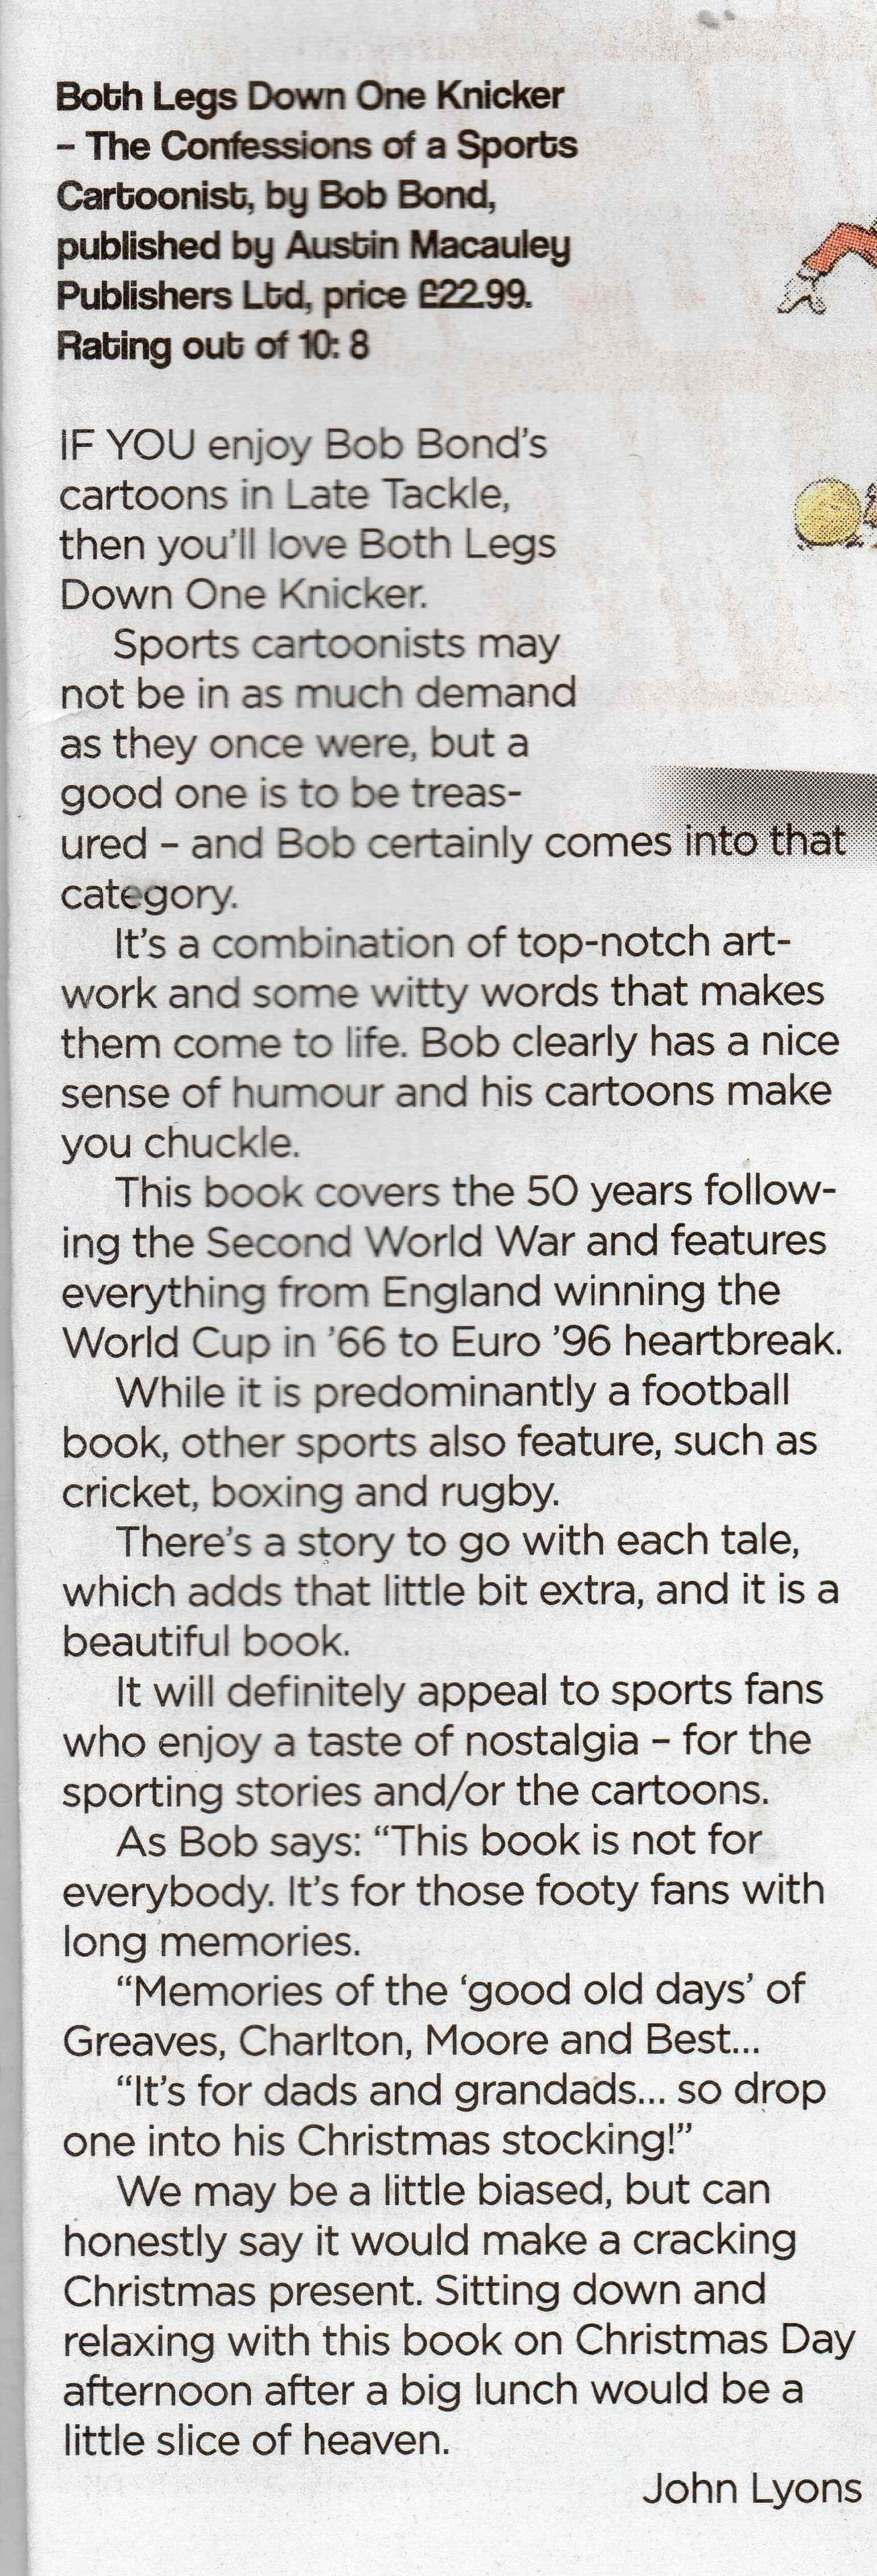 ‘Late Tackle’ magazine reviewed ‘Both Legs Down One Knicker’ by Bob Bond